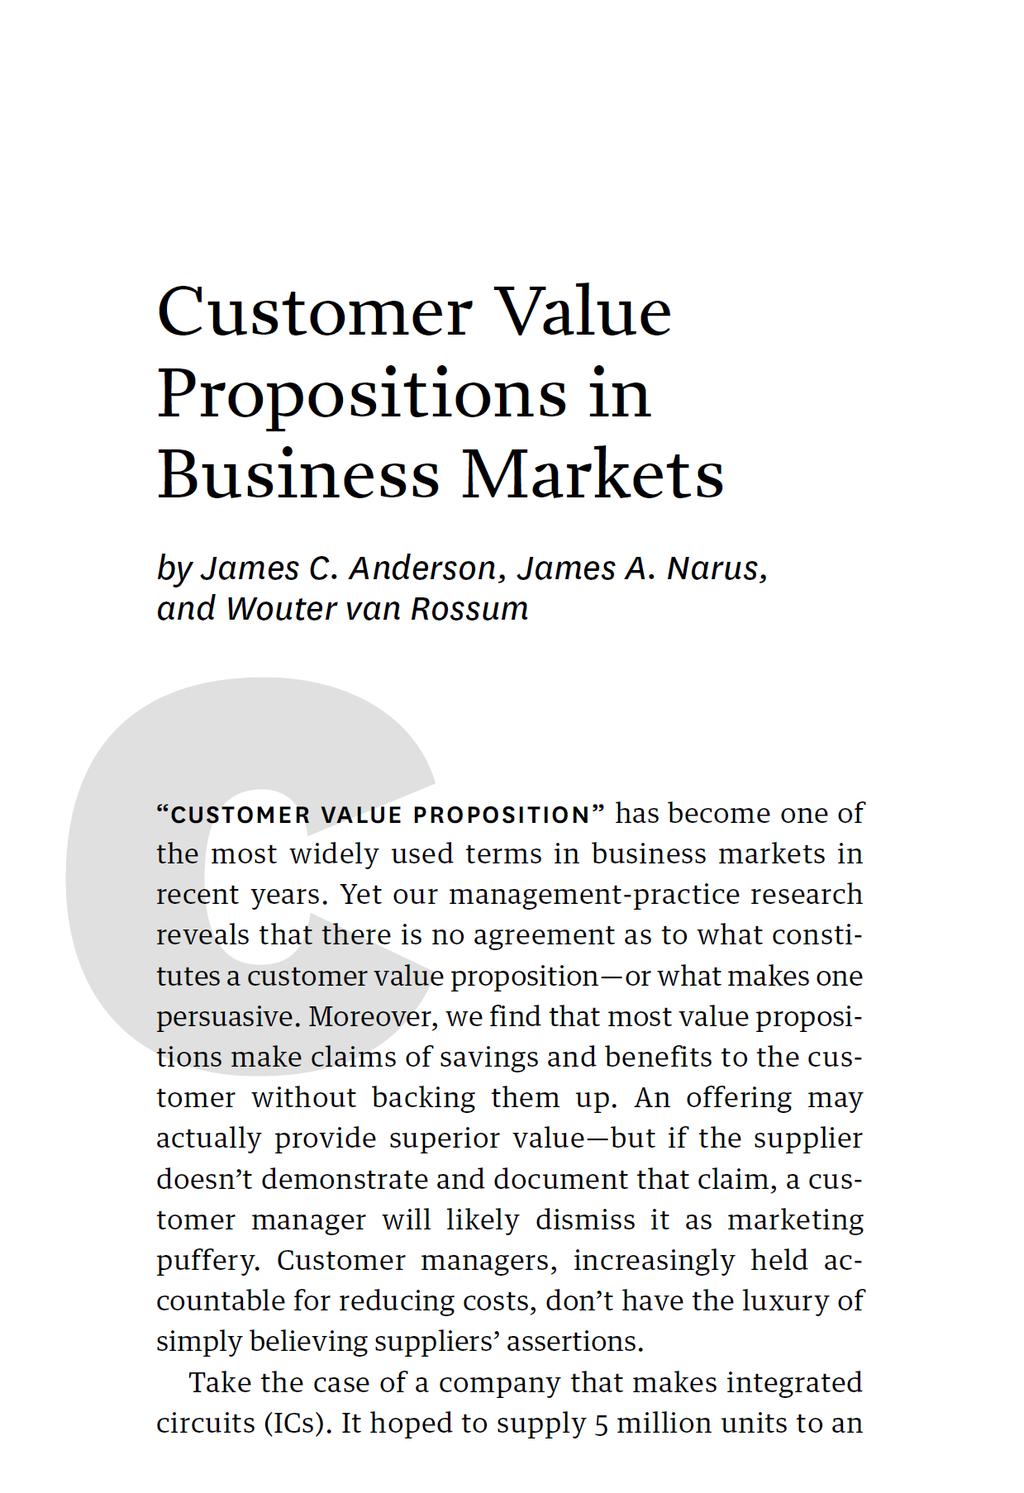 Over Customer Value Propositions.